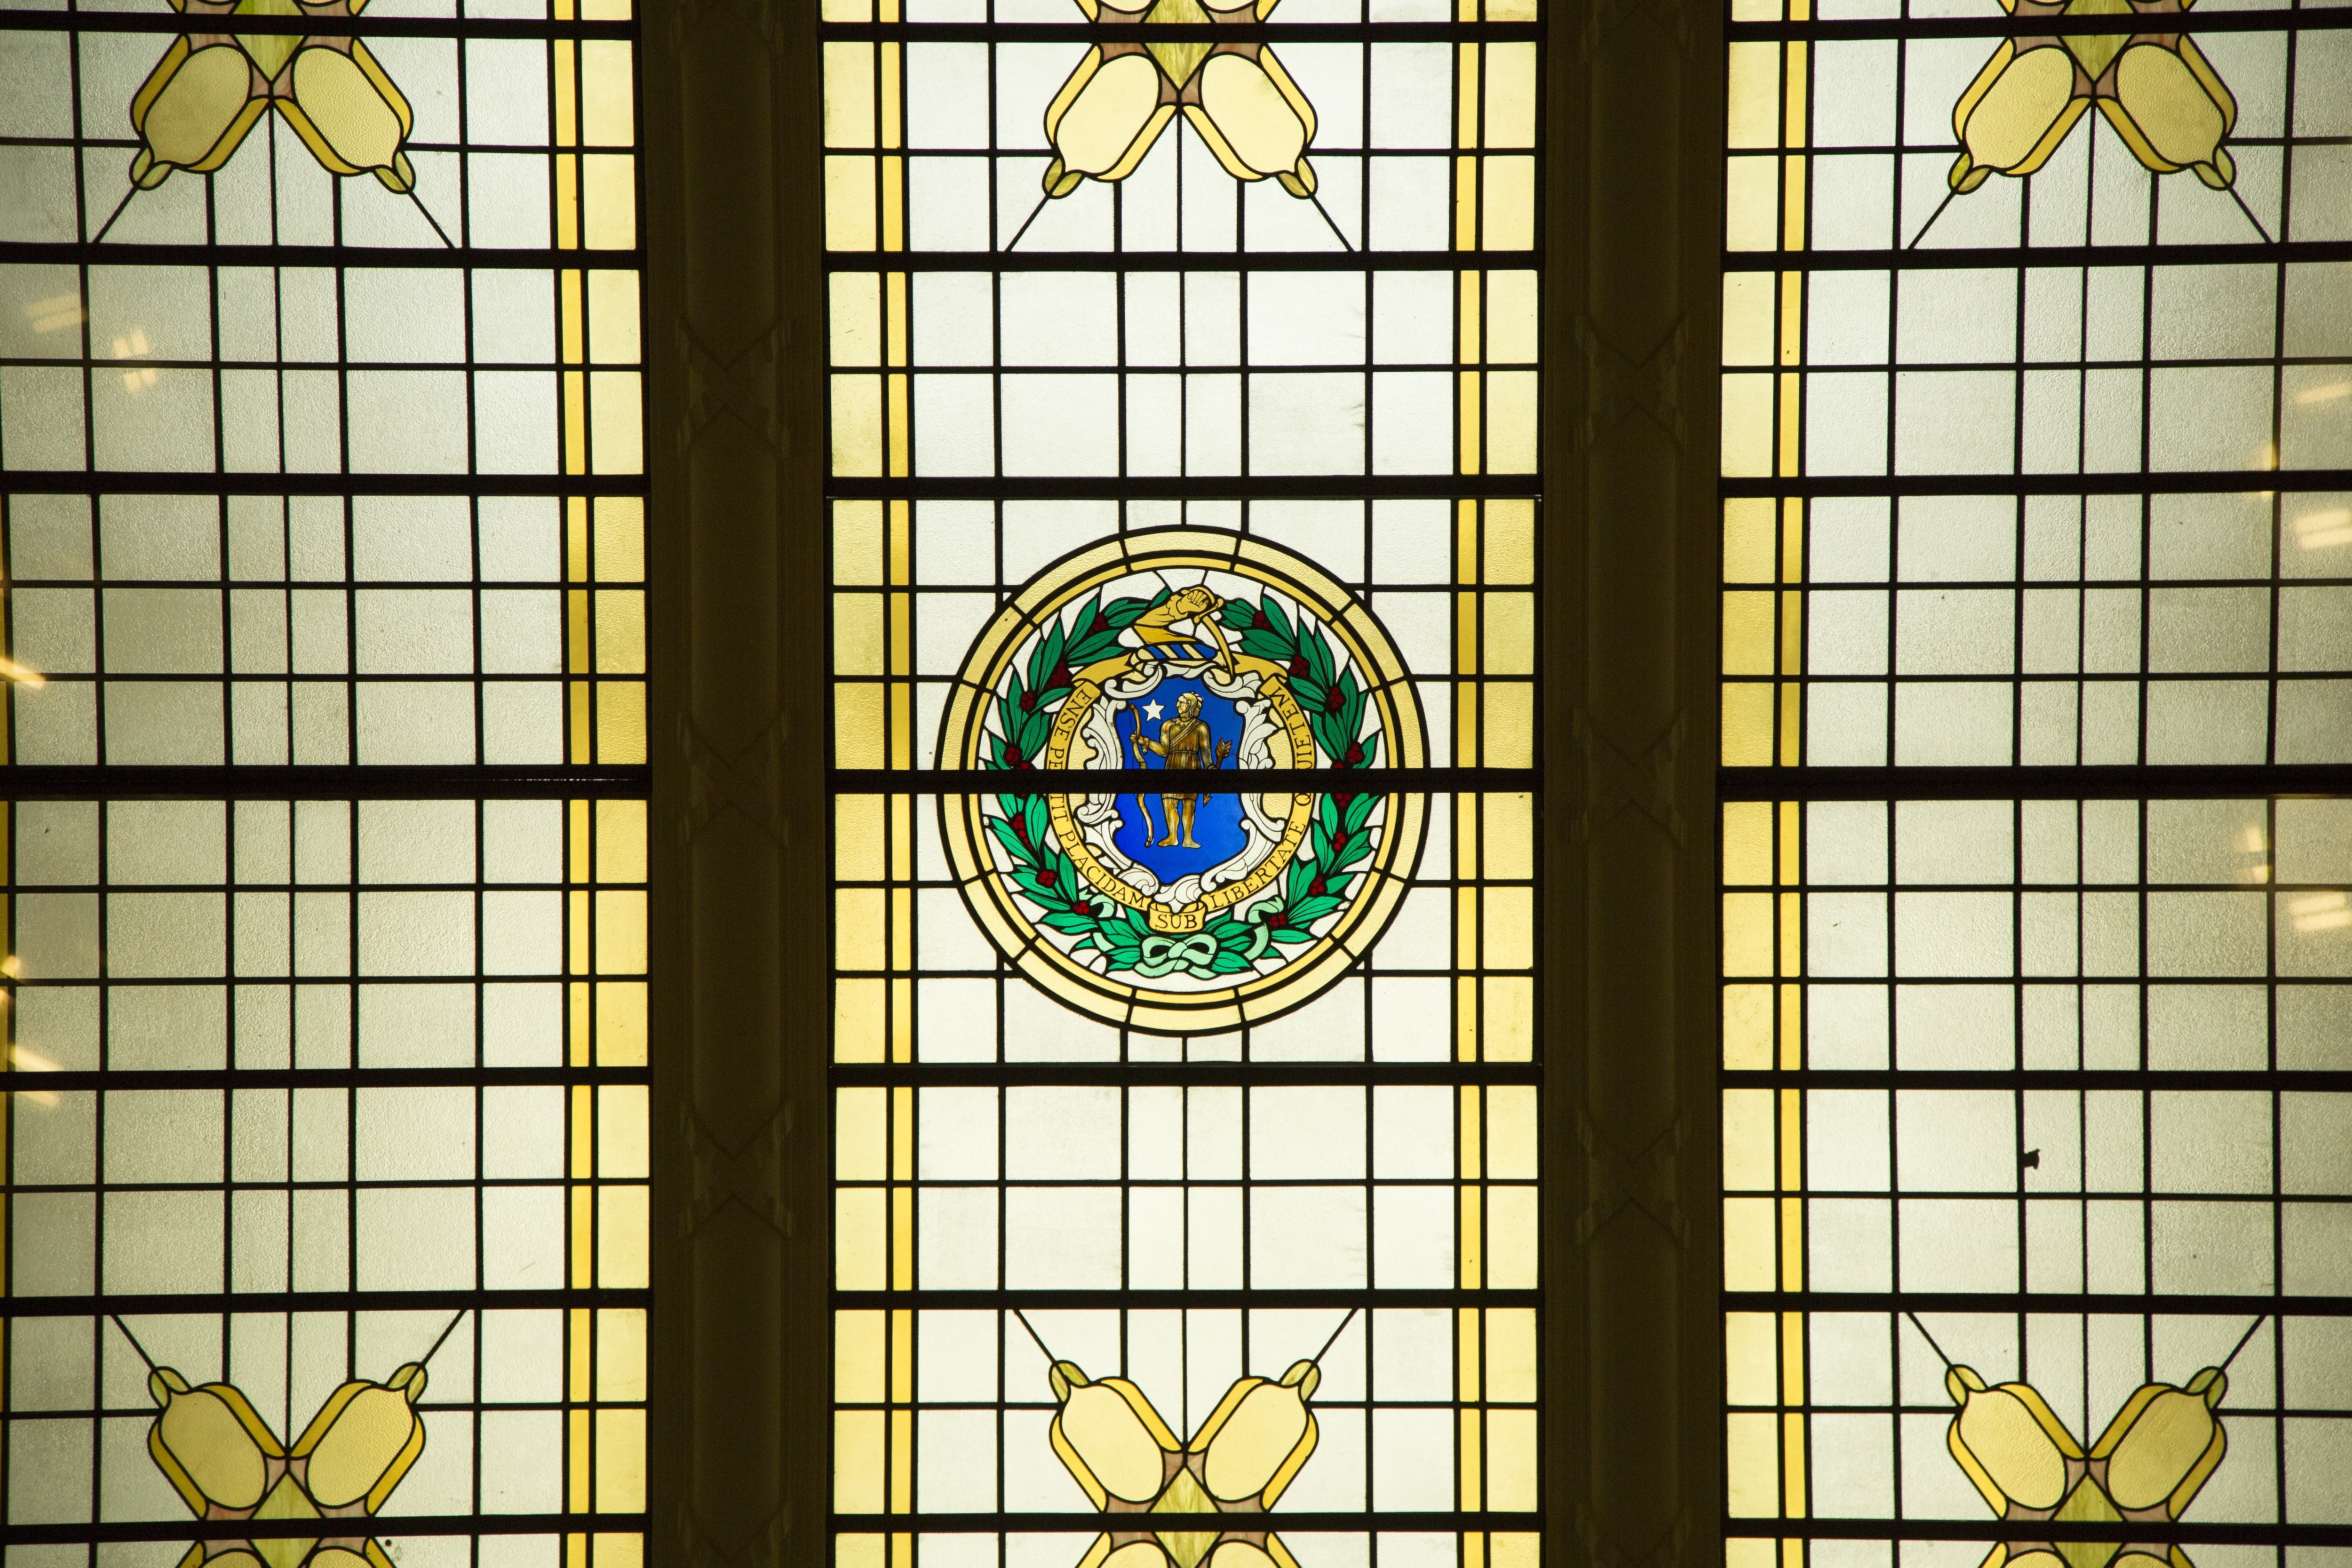 Stained glass window in a Worcester, Massachusetts, building